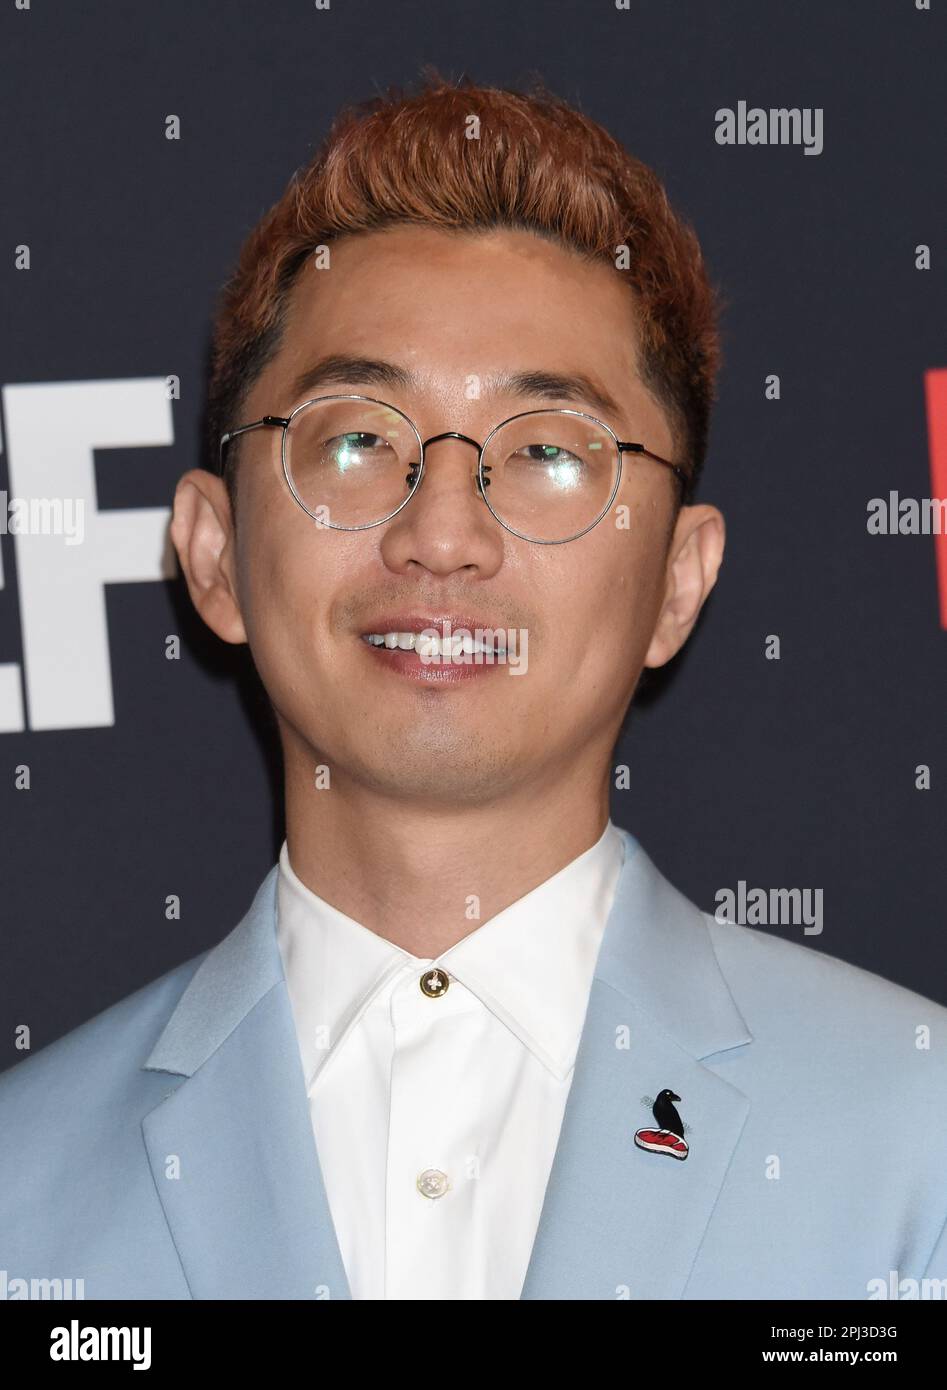 Lee Sung Jin arriving to Netflix’s “BEEF” Los Angeles Premiere held at ...